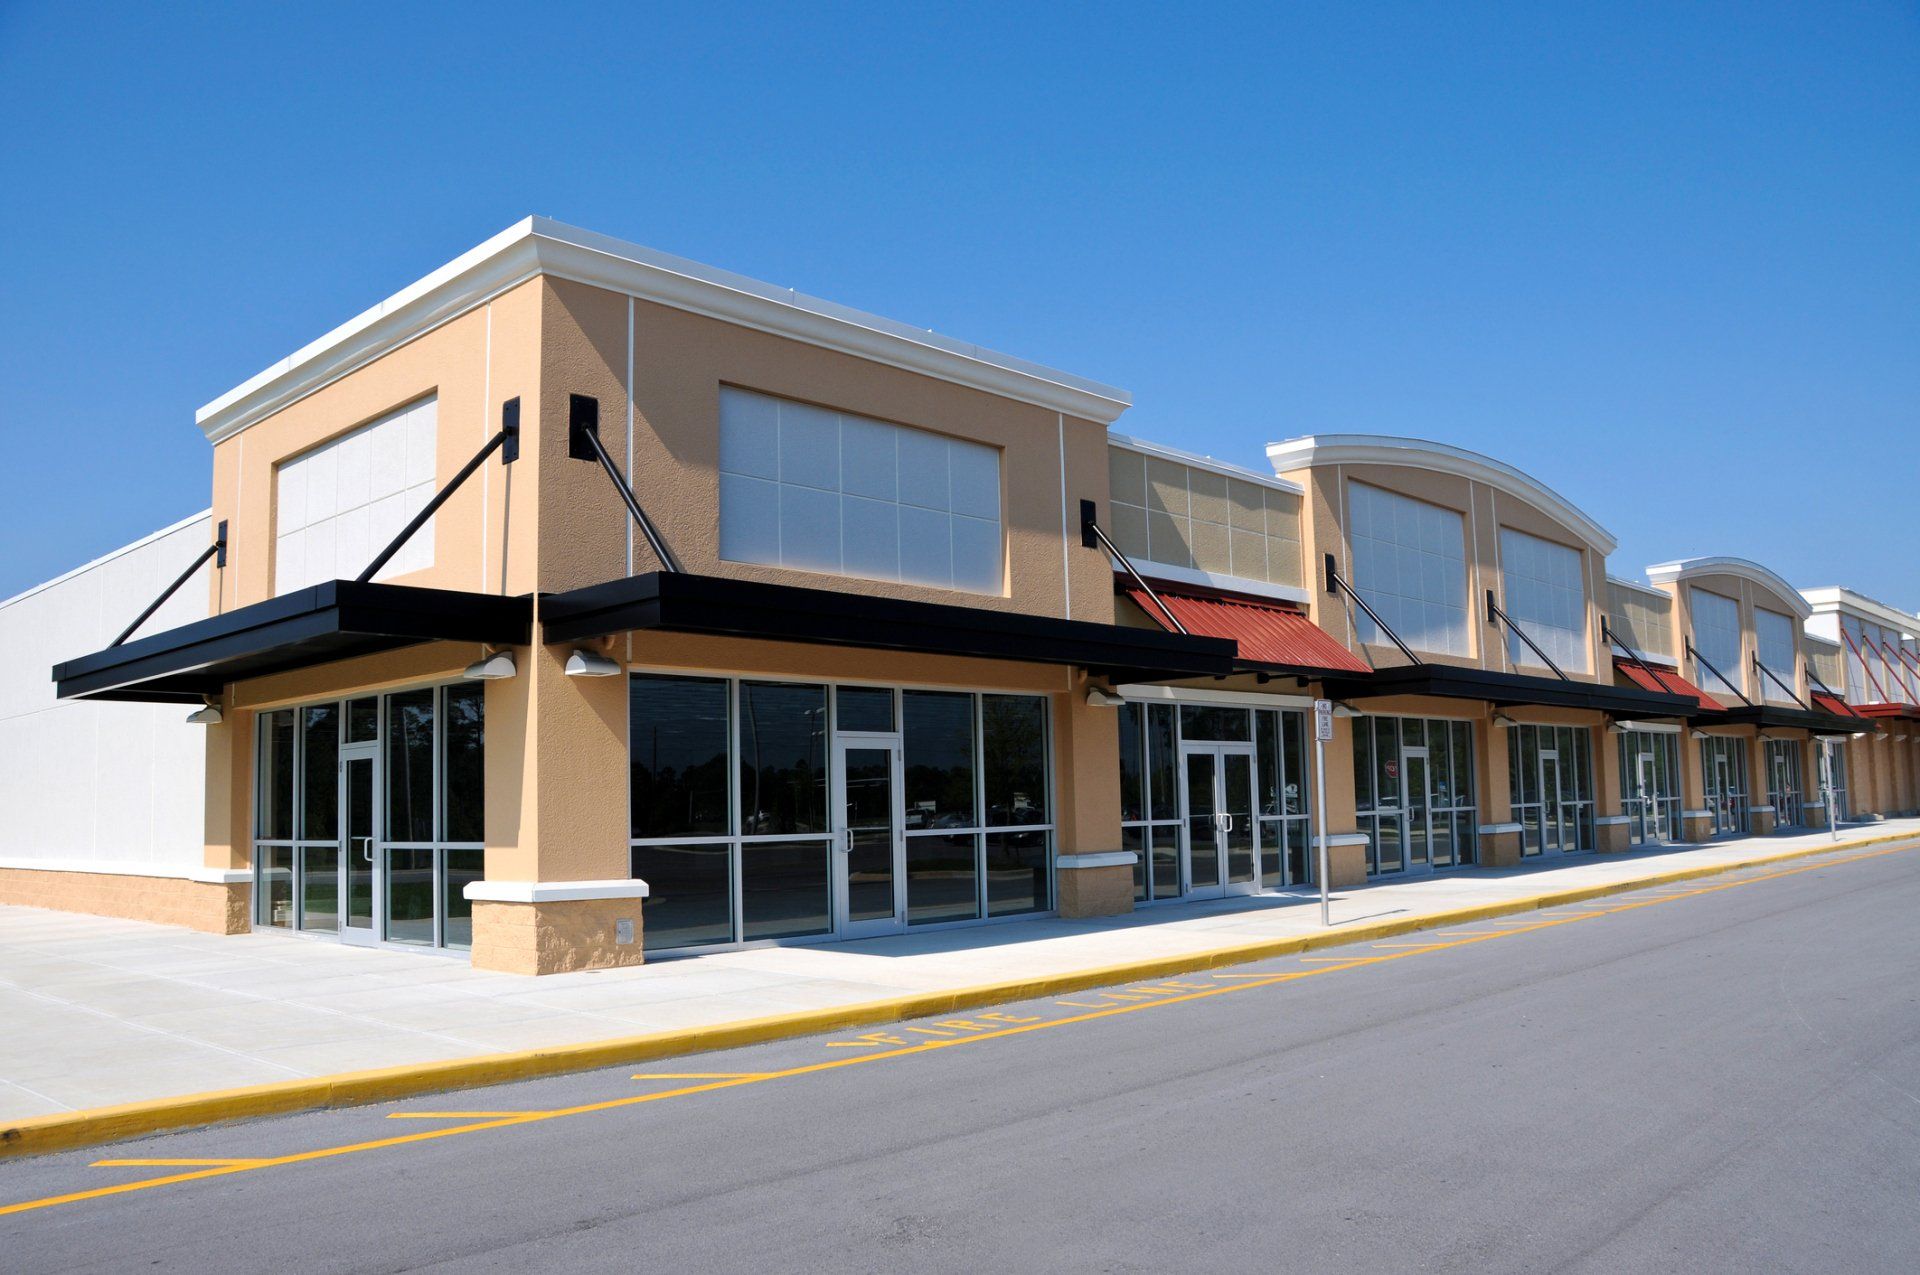 Facility Management Services for Commercial & Retail Shopping Centers Redding, CA. Authority Property Management